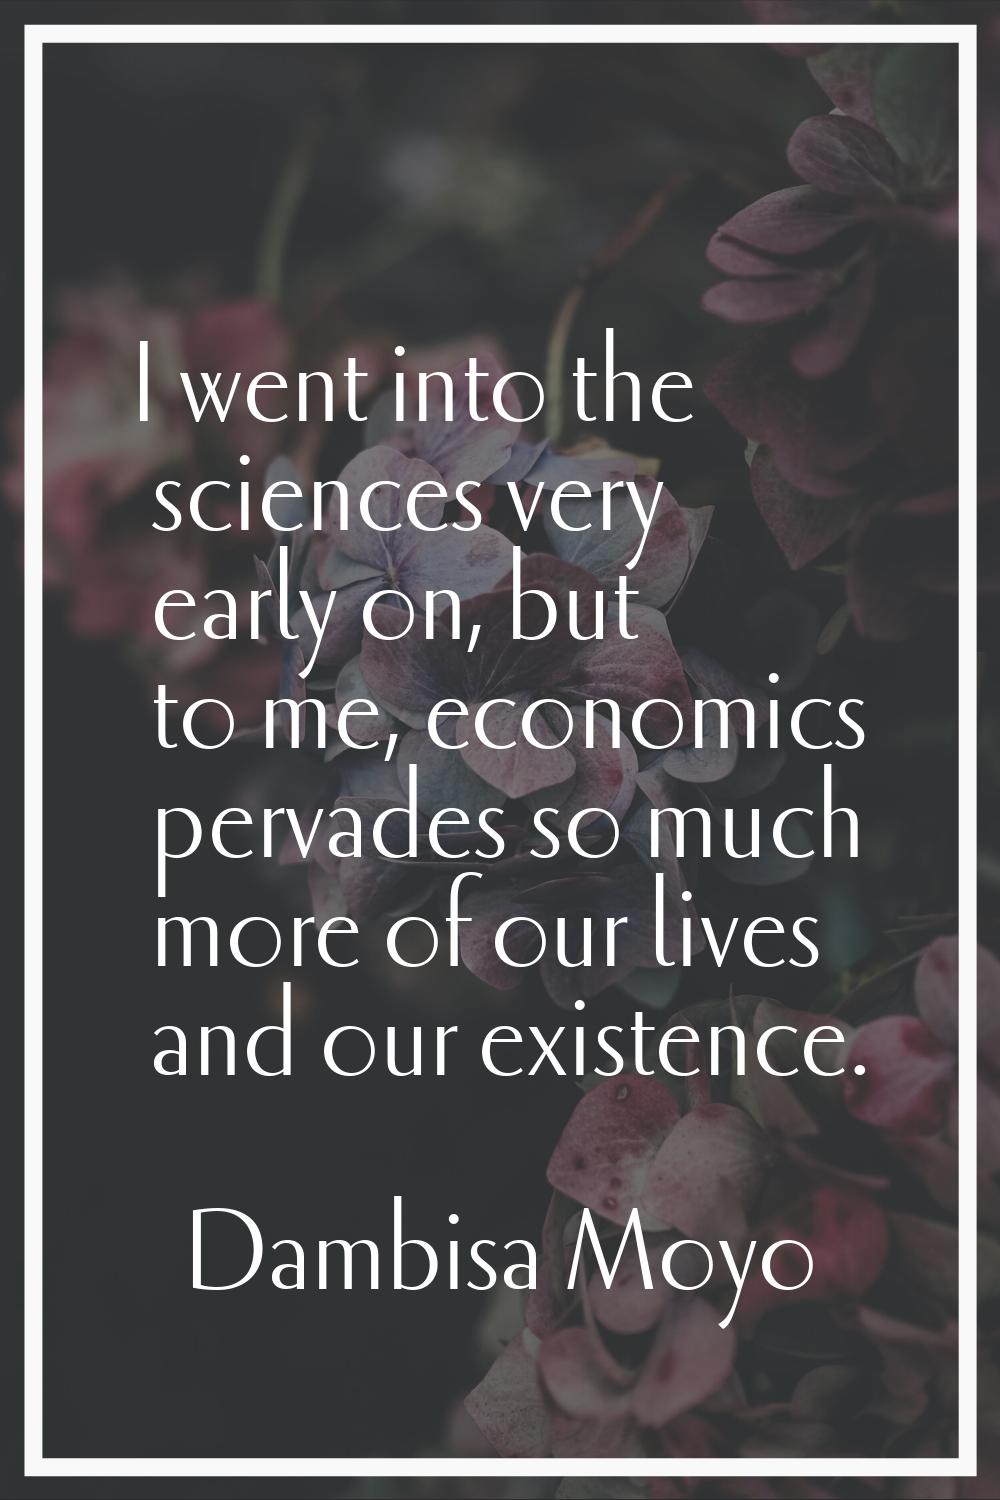 I went into the sciences very early on, but to me, economics pervades so much more of our lives and